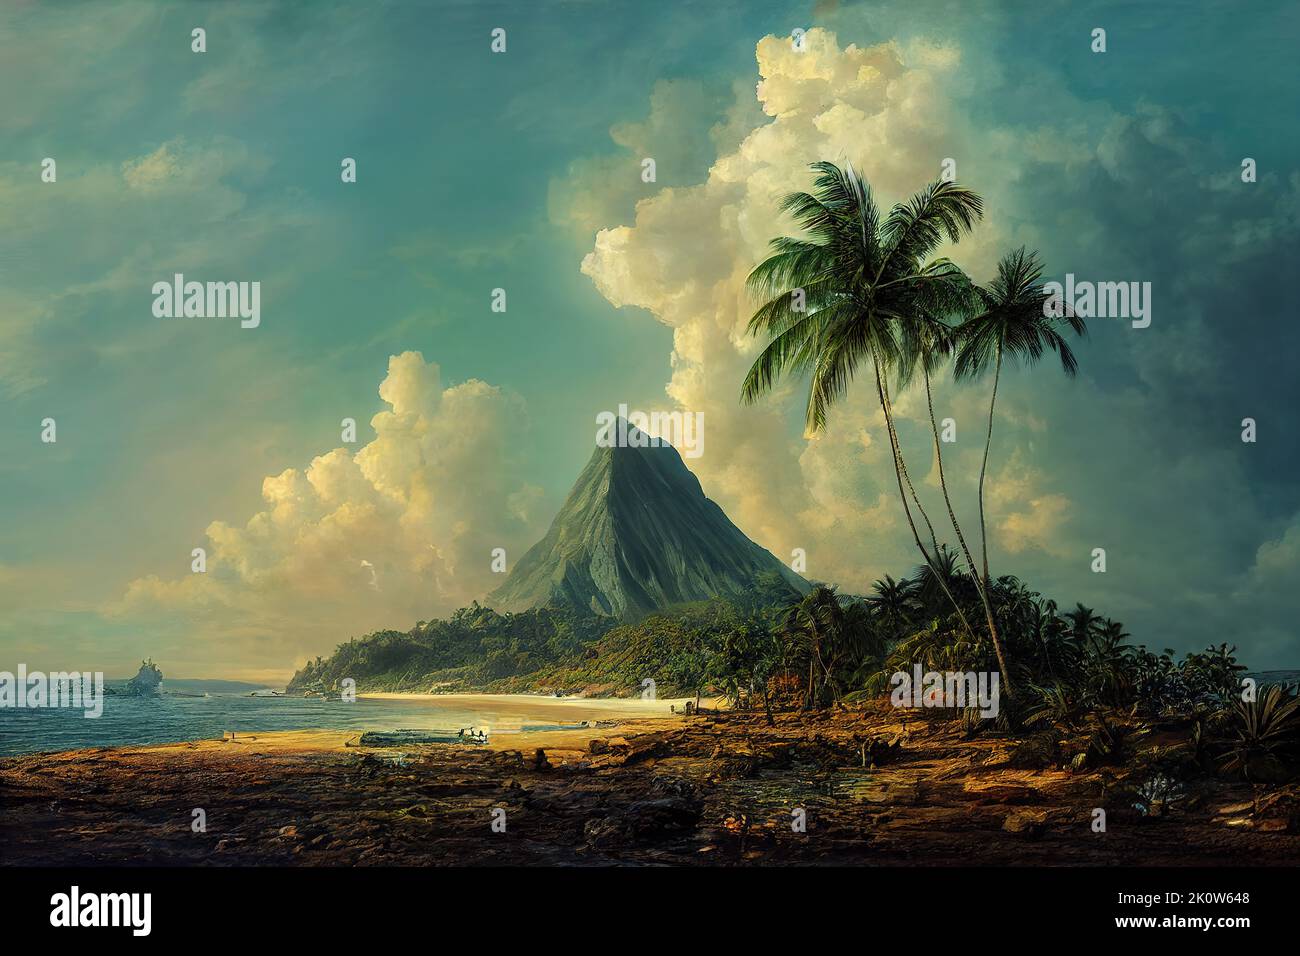 Tropical Bounty Paradise Island in the ocean with mountain palm tree Stock Photo